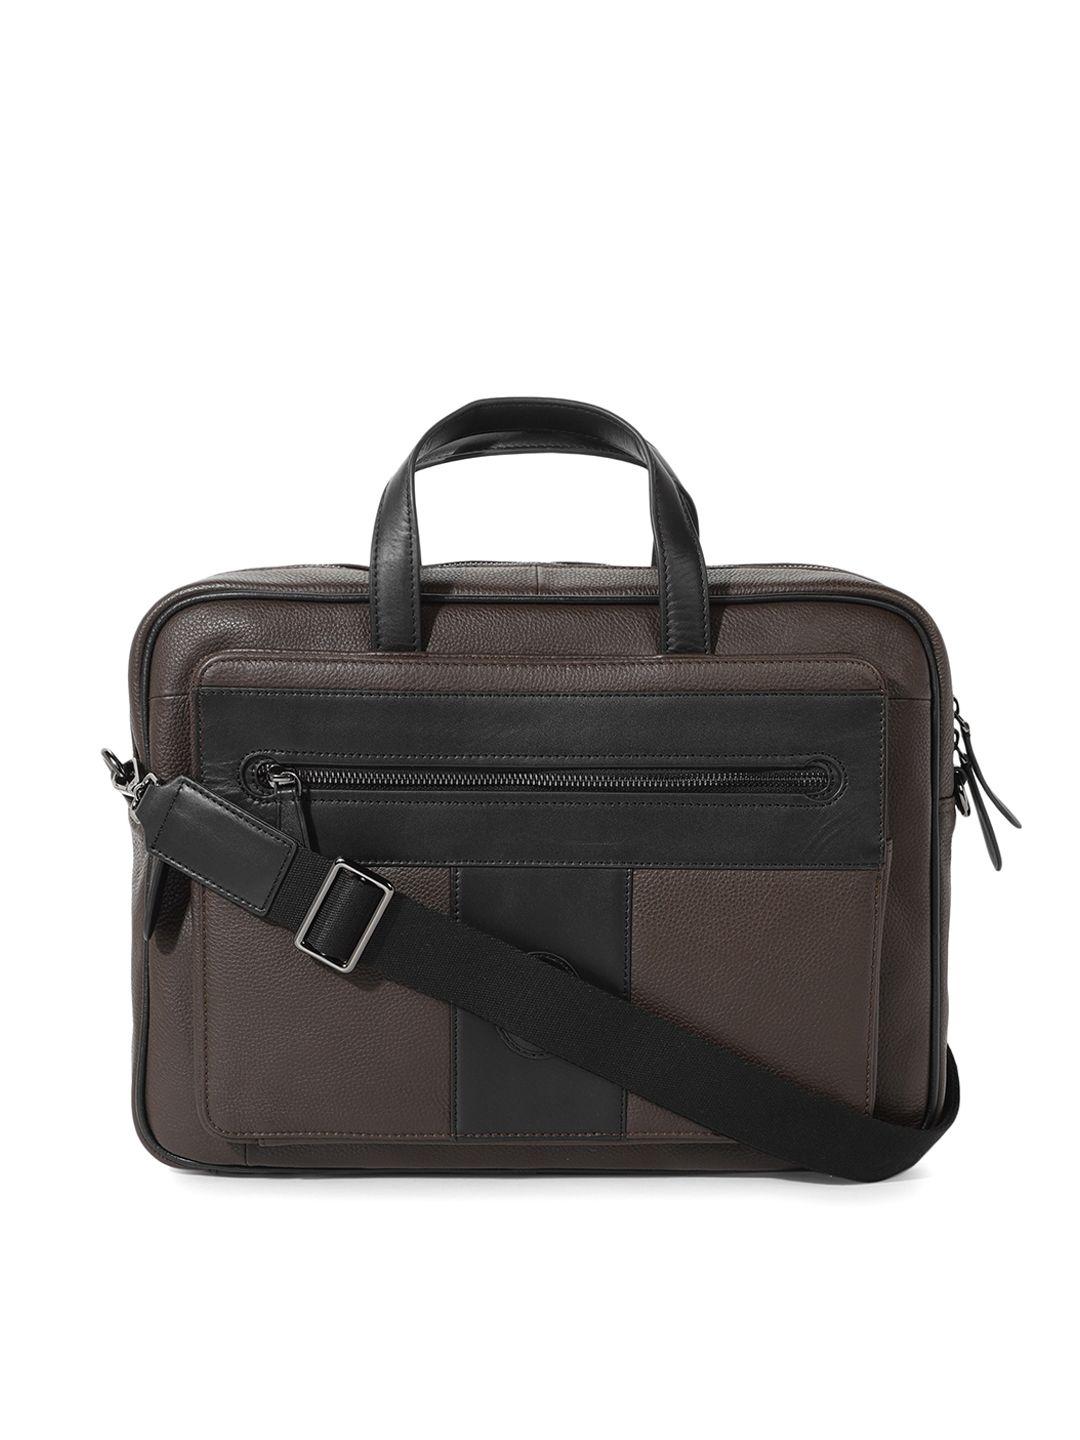 ted-baker-brown-colourblocked-leather-structured-handheld-bag